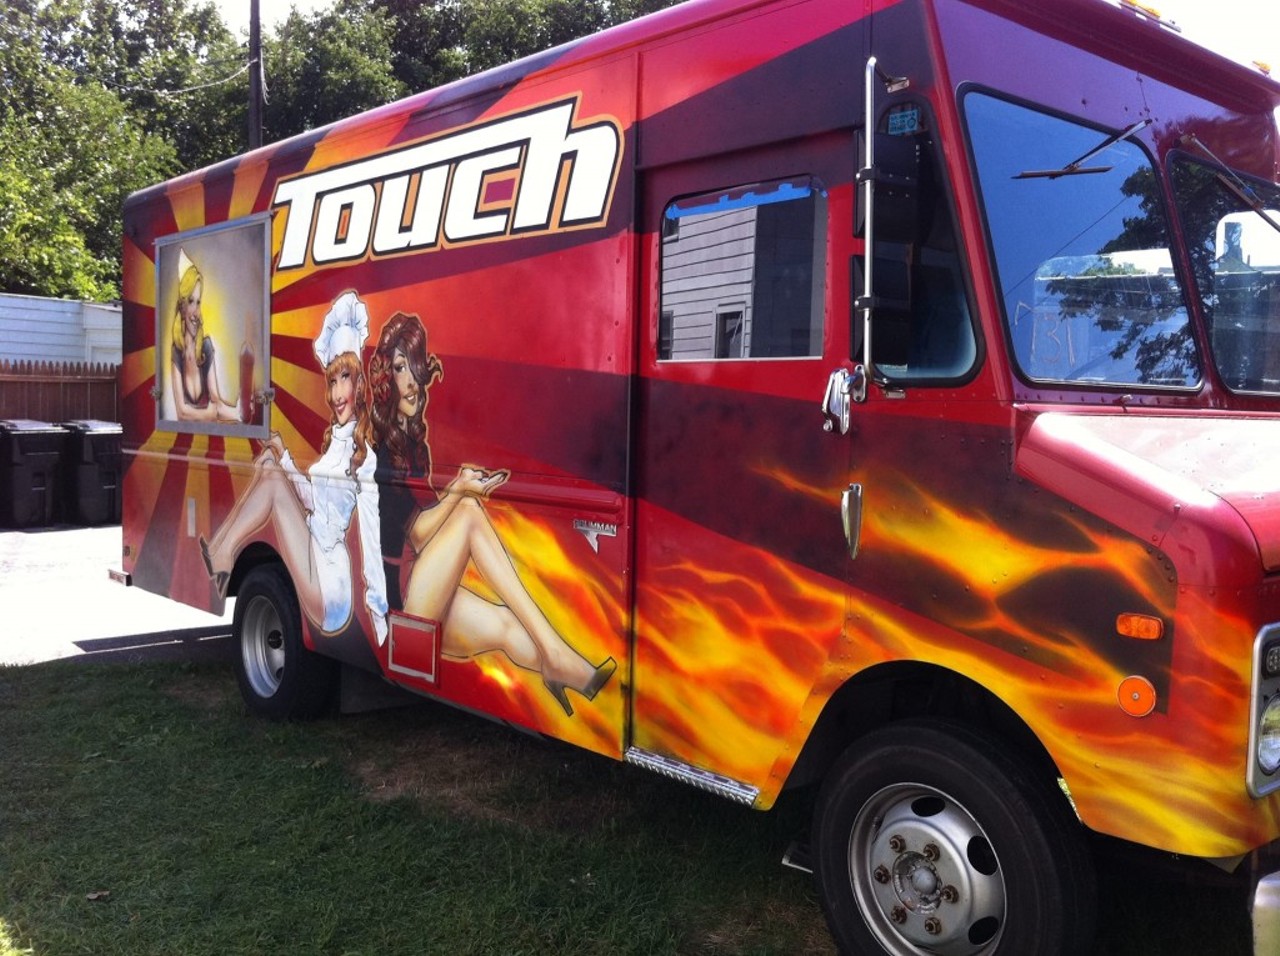 Touch - You can't miss this anime themed truck rolling down the street,  and one taste of their menu you will be chasing it down for more.